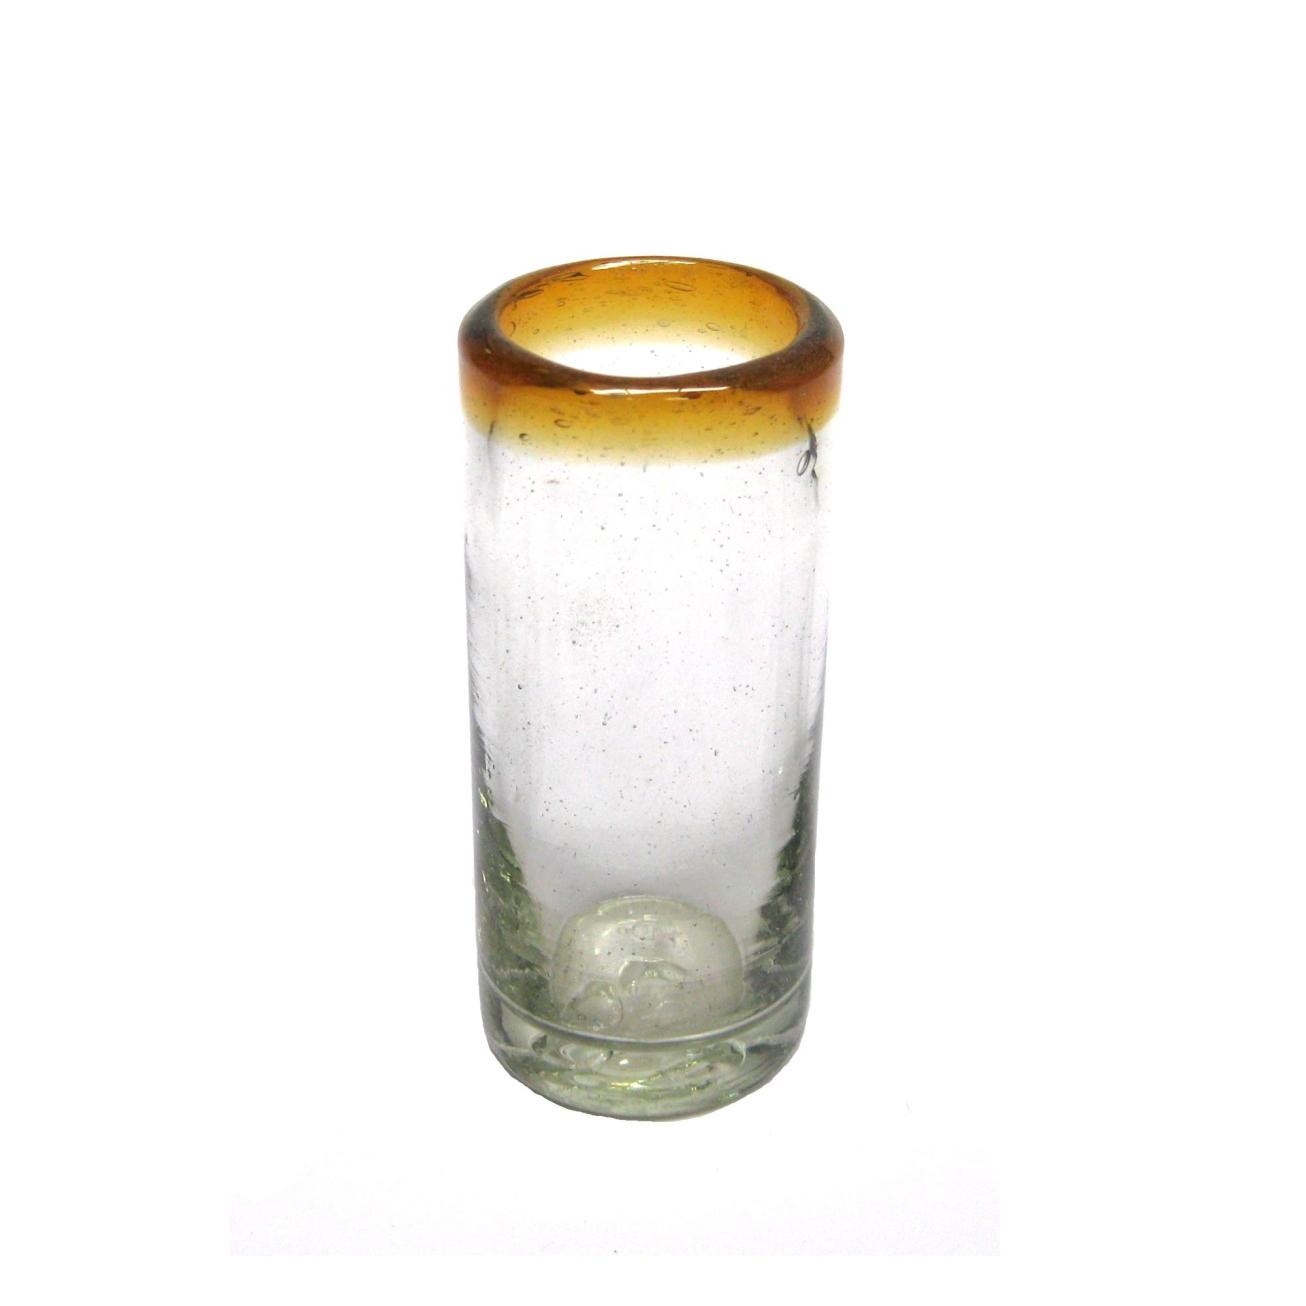 Wholesale Amber Rim Glassware / Amber Rim 2 oz Tequila Shot Glasses  / These shot glasses bordered in amber color are perfect for sipping your favourite tequila or any other liquor.